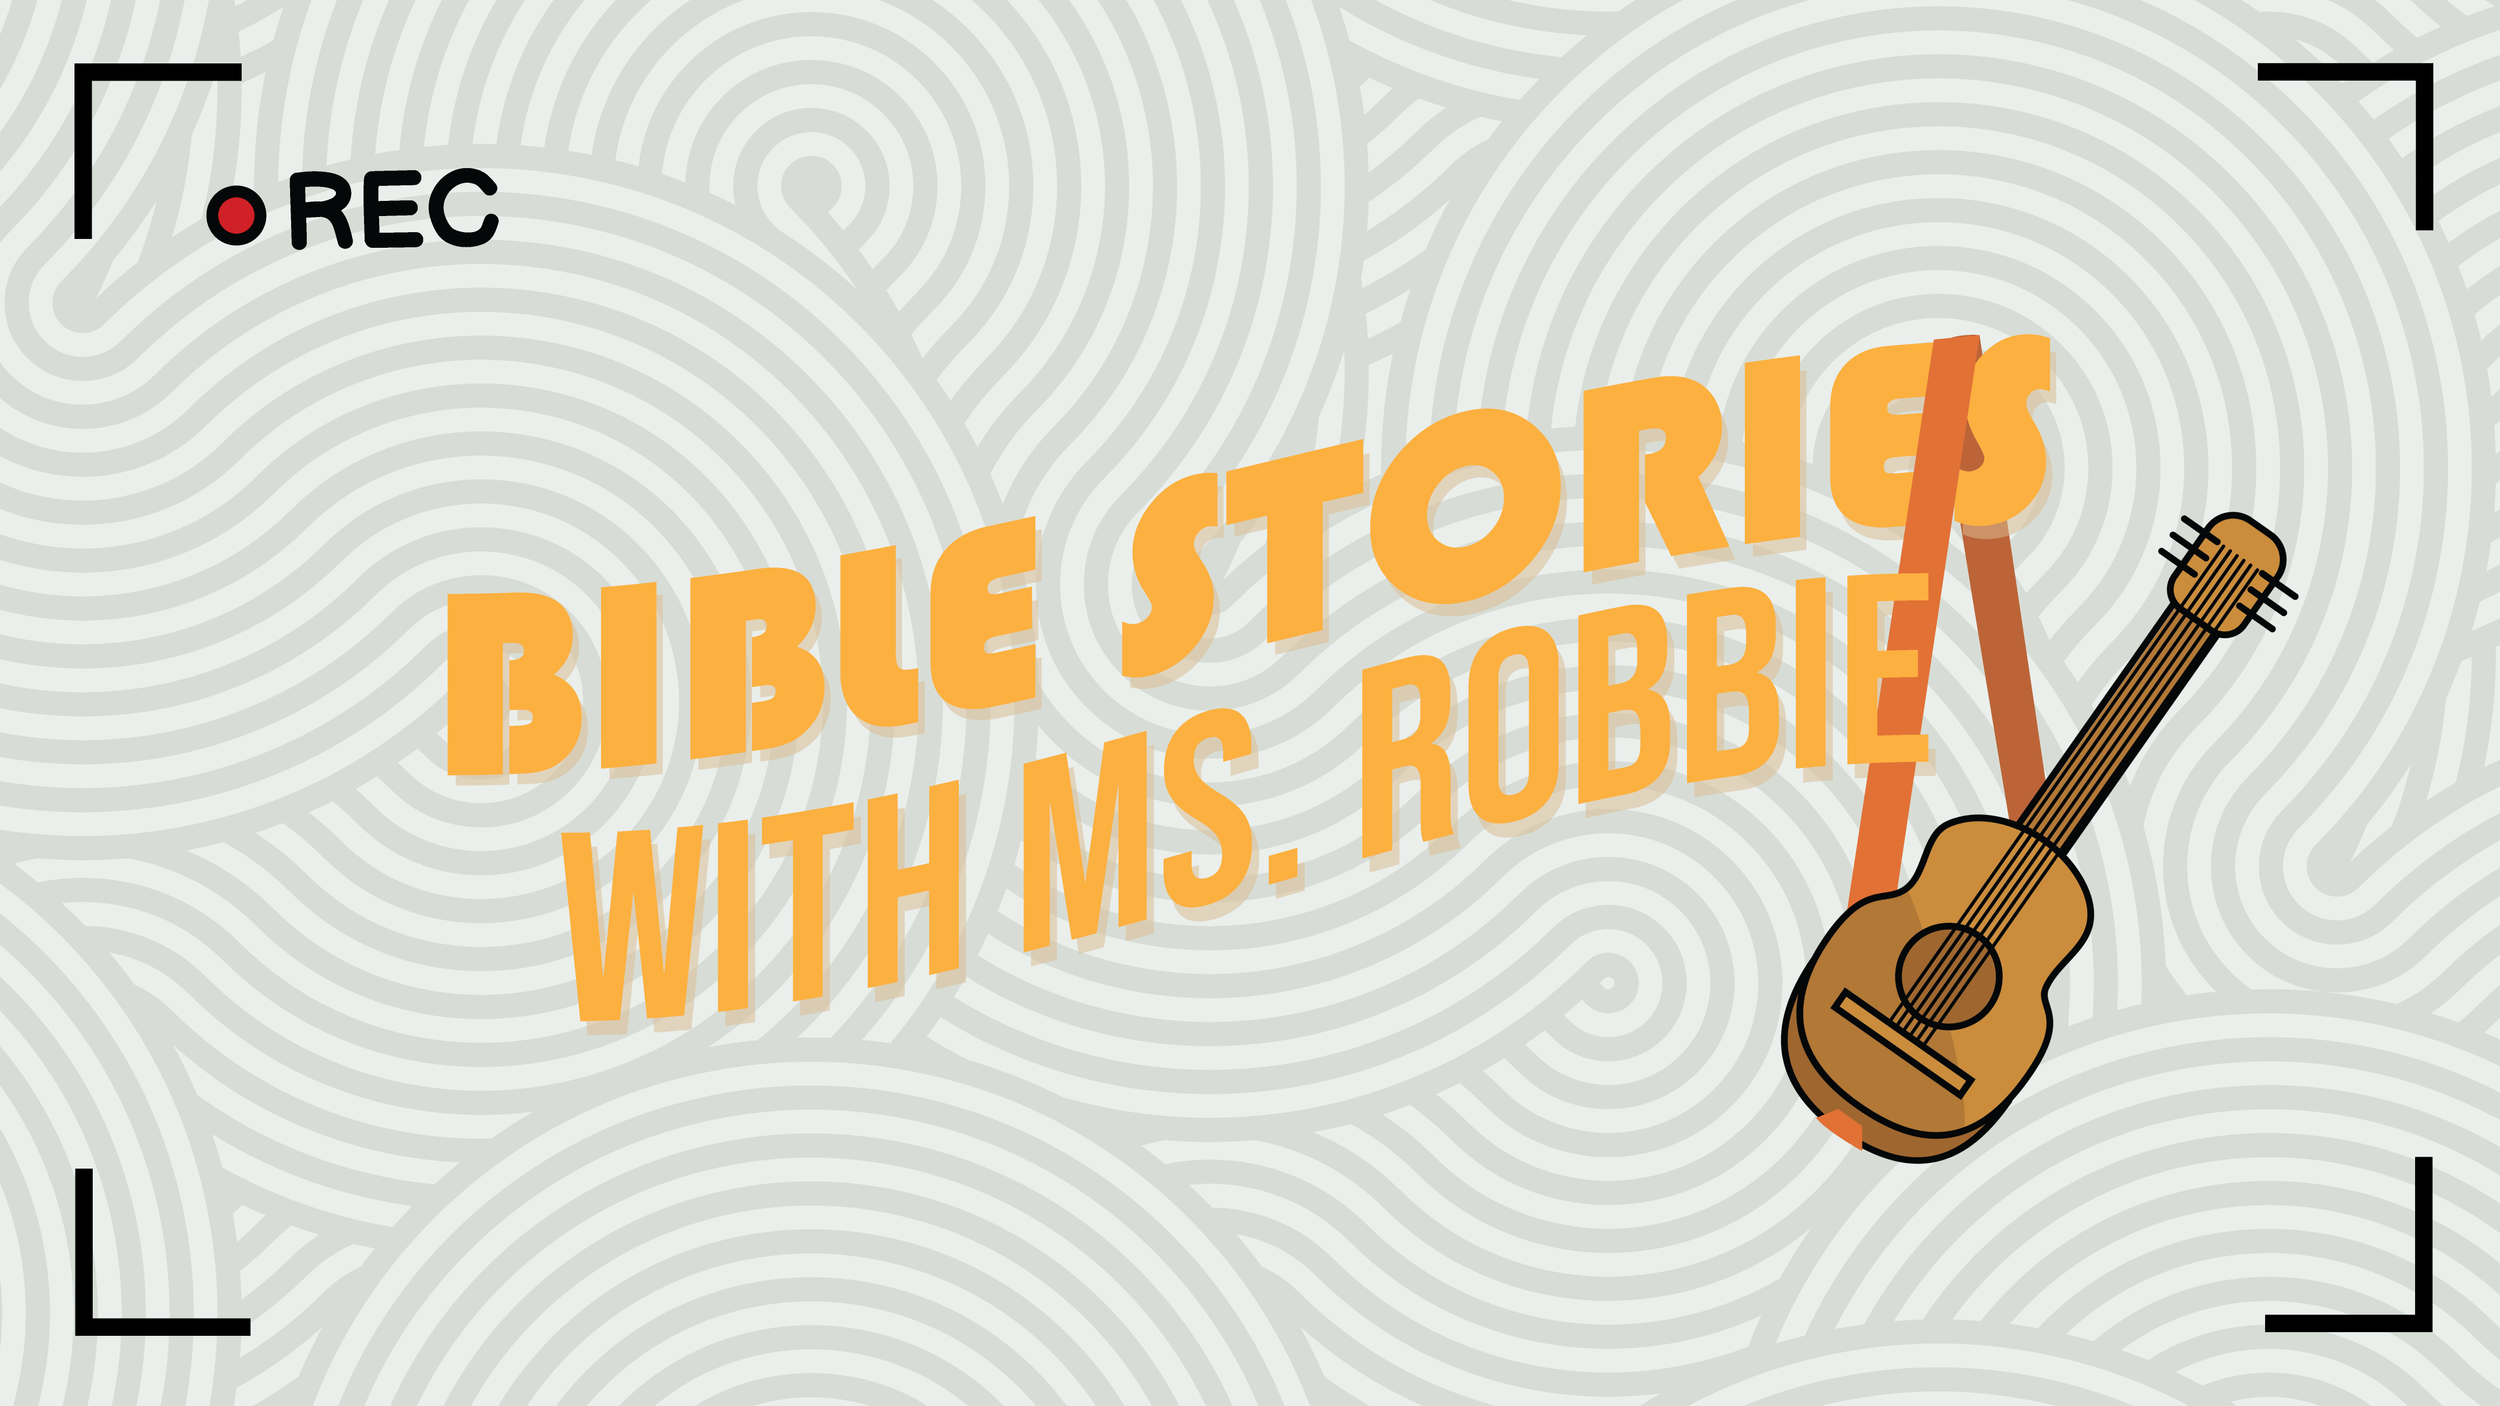 Bible Stories with Ms. Robbie